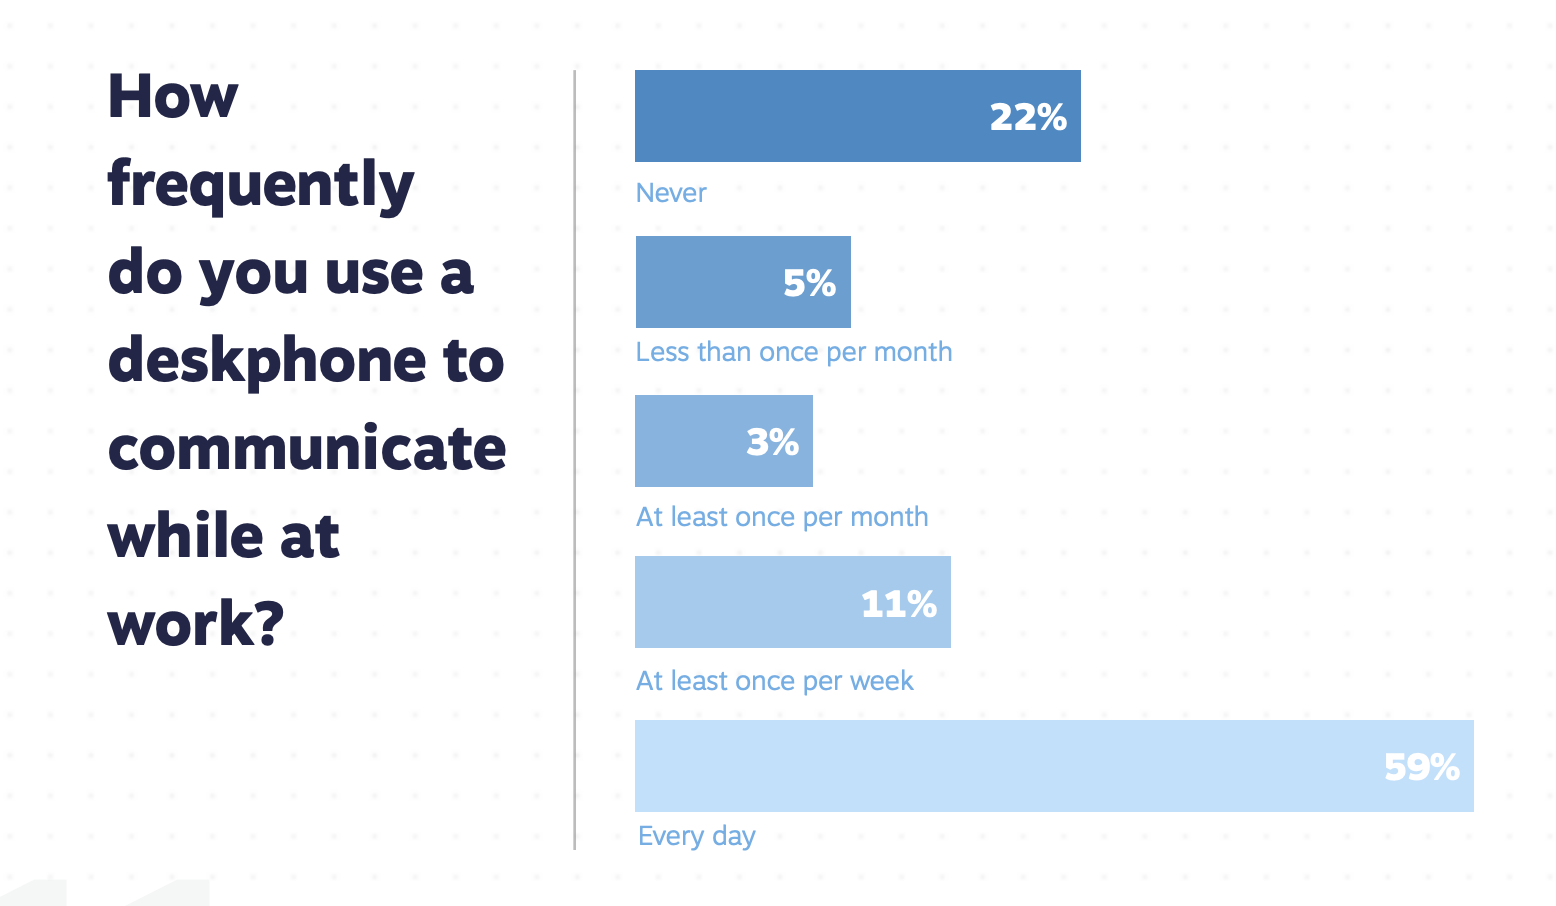 Bar graph showing that 59% of employees use a desk phone every day